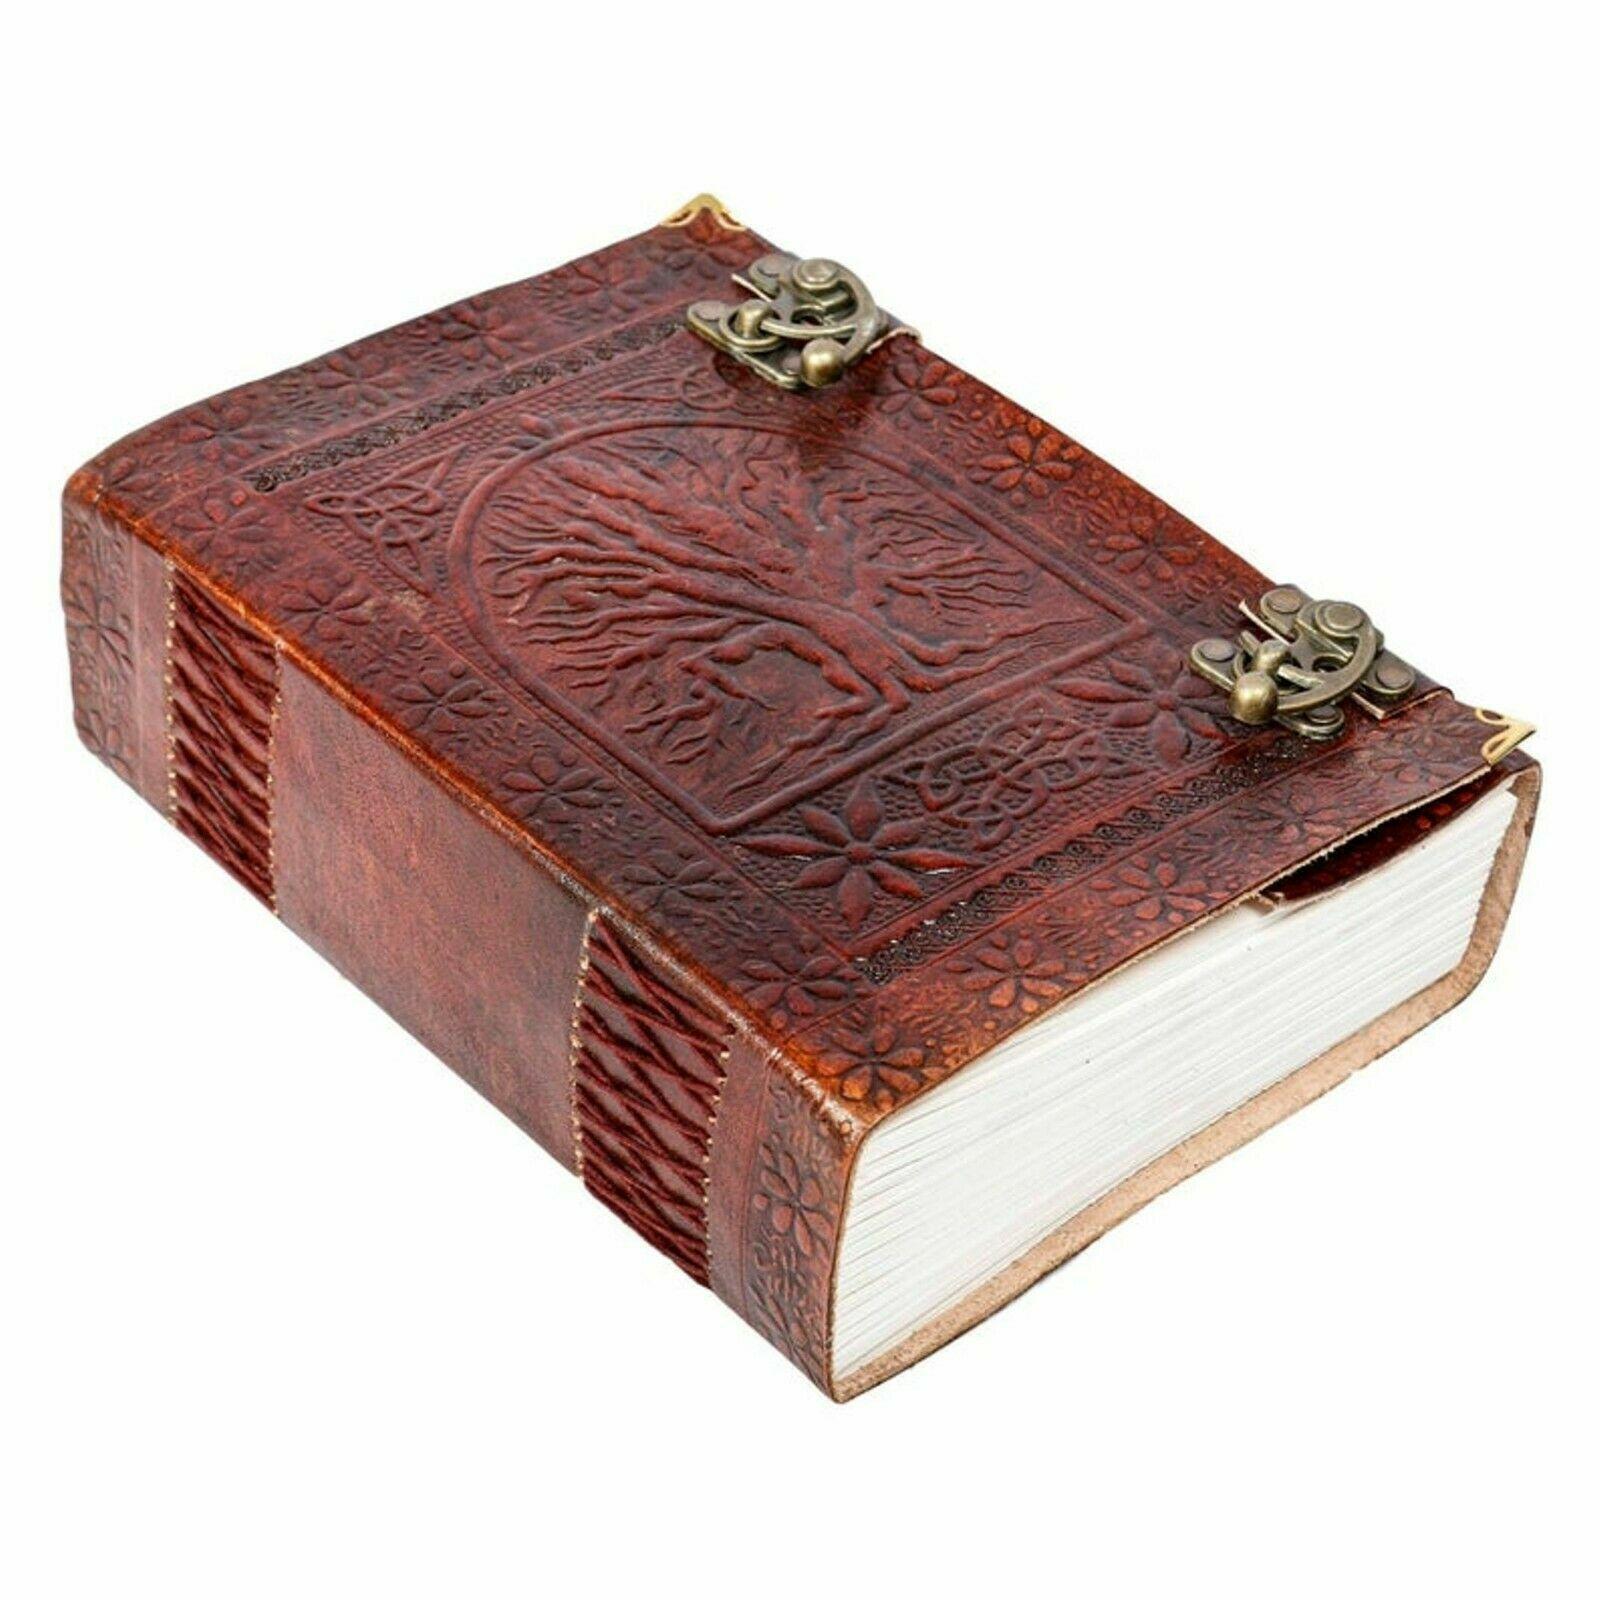 Primary image for 600 Pages Large Tree of Life Leather Journal, Diary Notebook Handmade Book